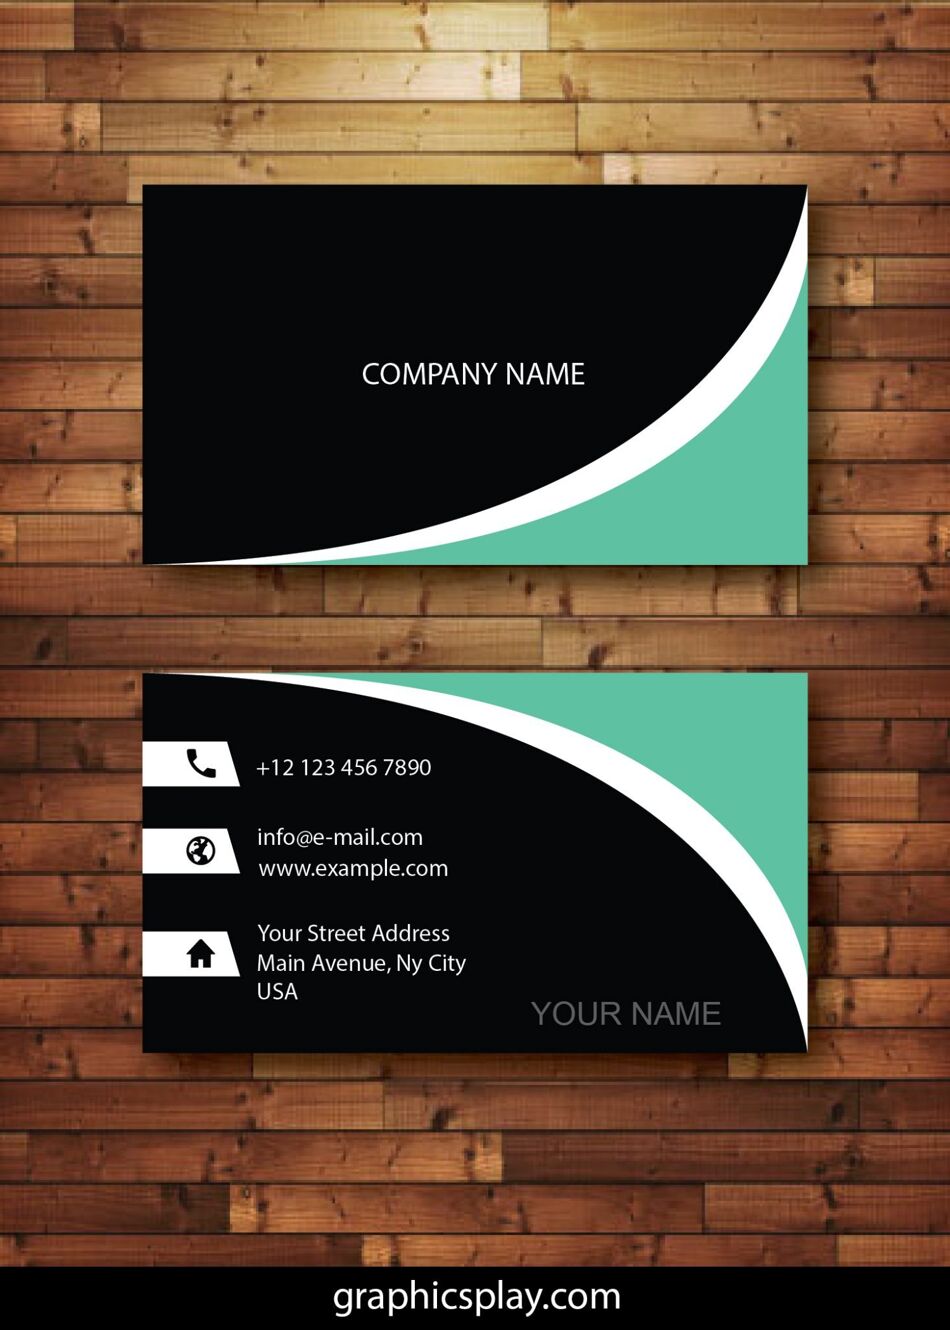 Business Card Design Vector Template - ID 4143 1